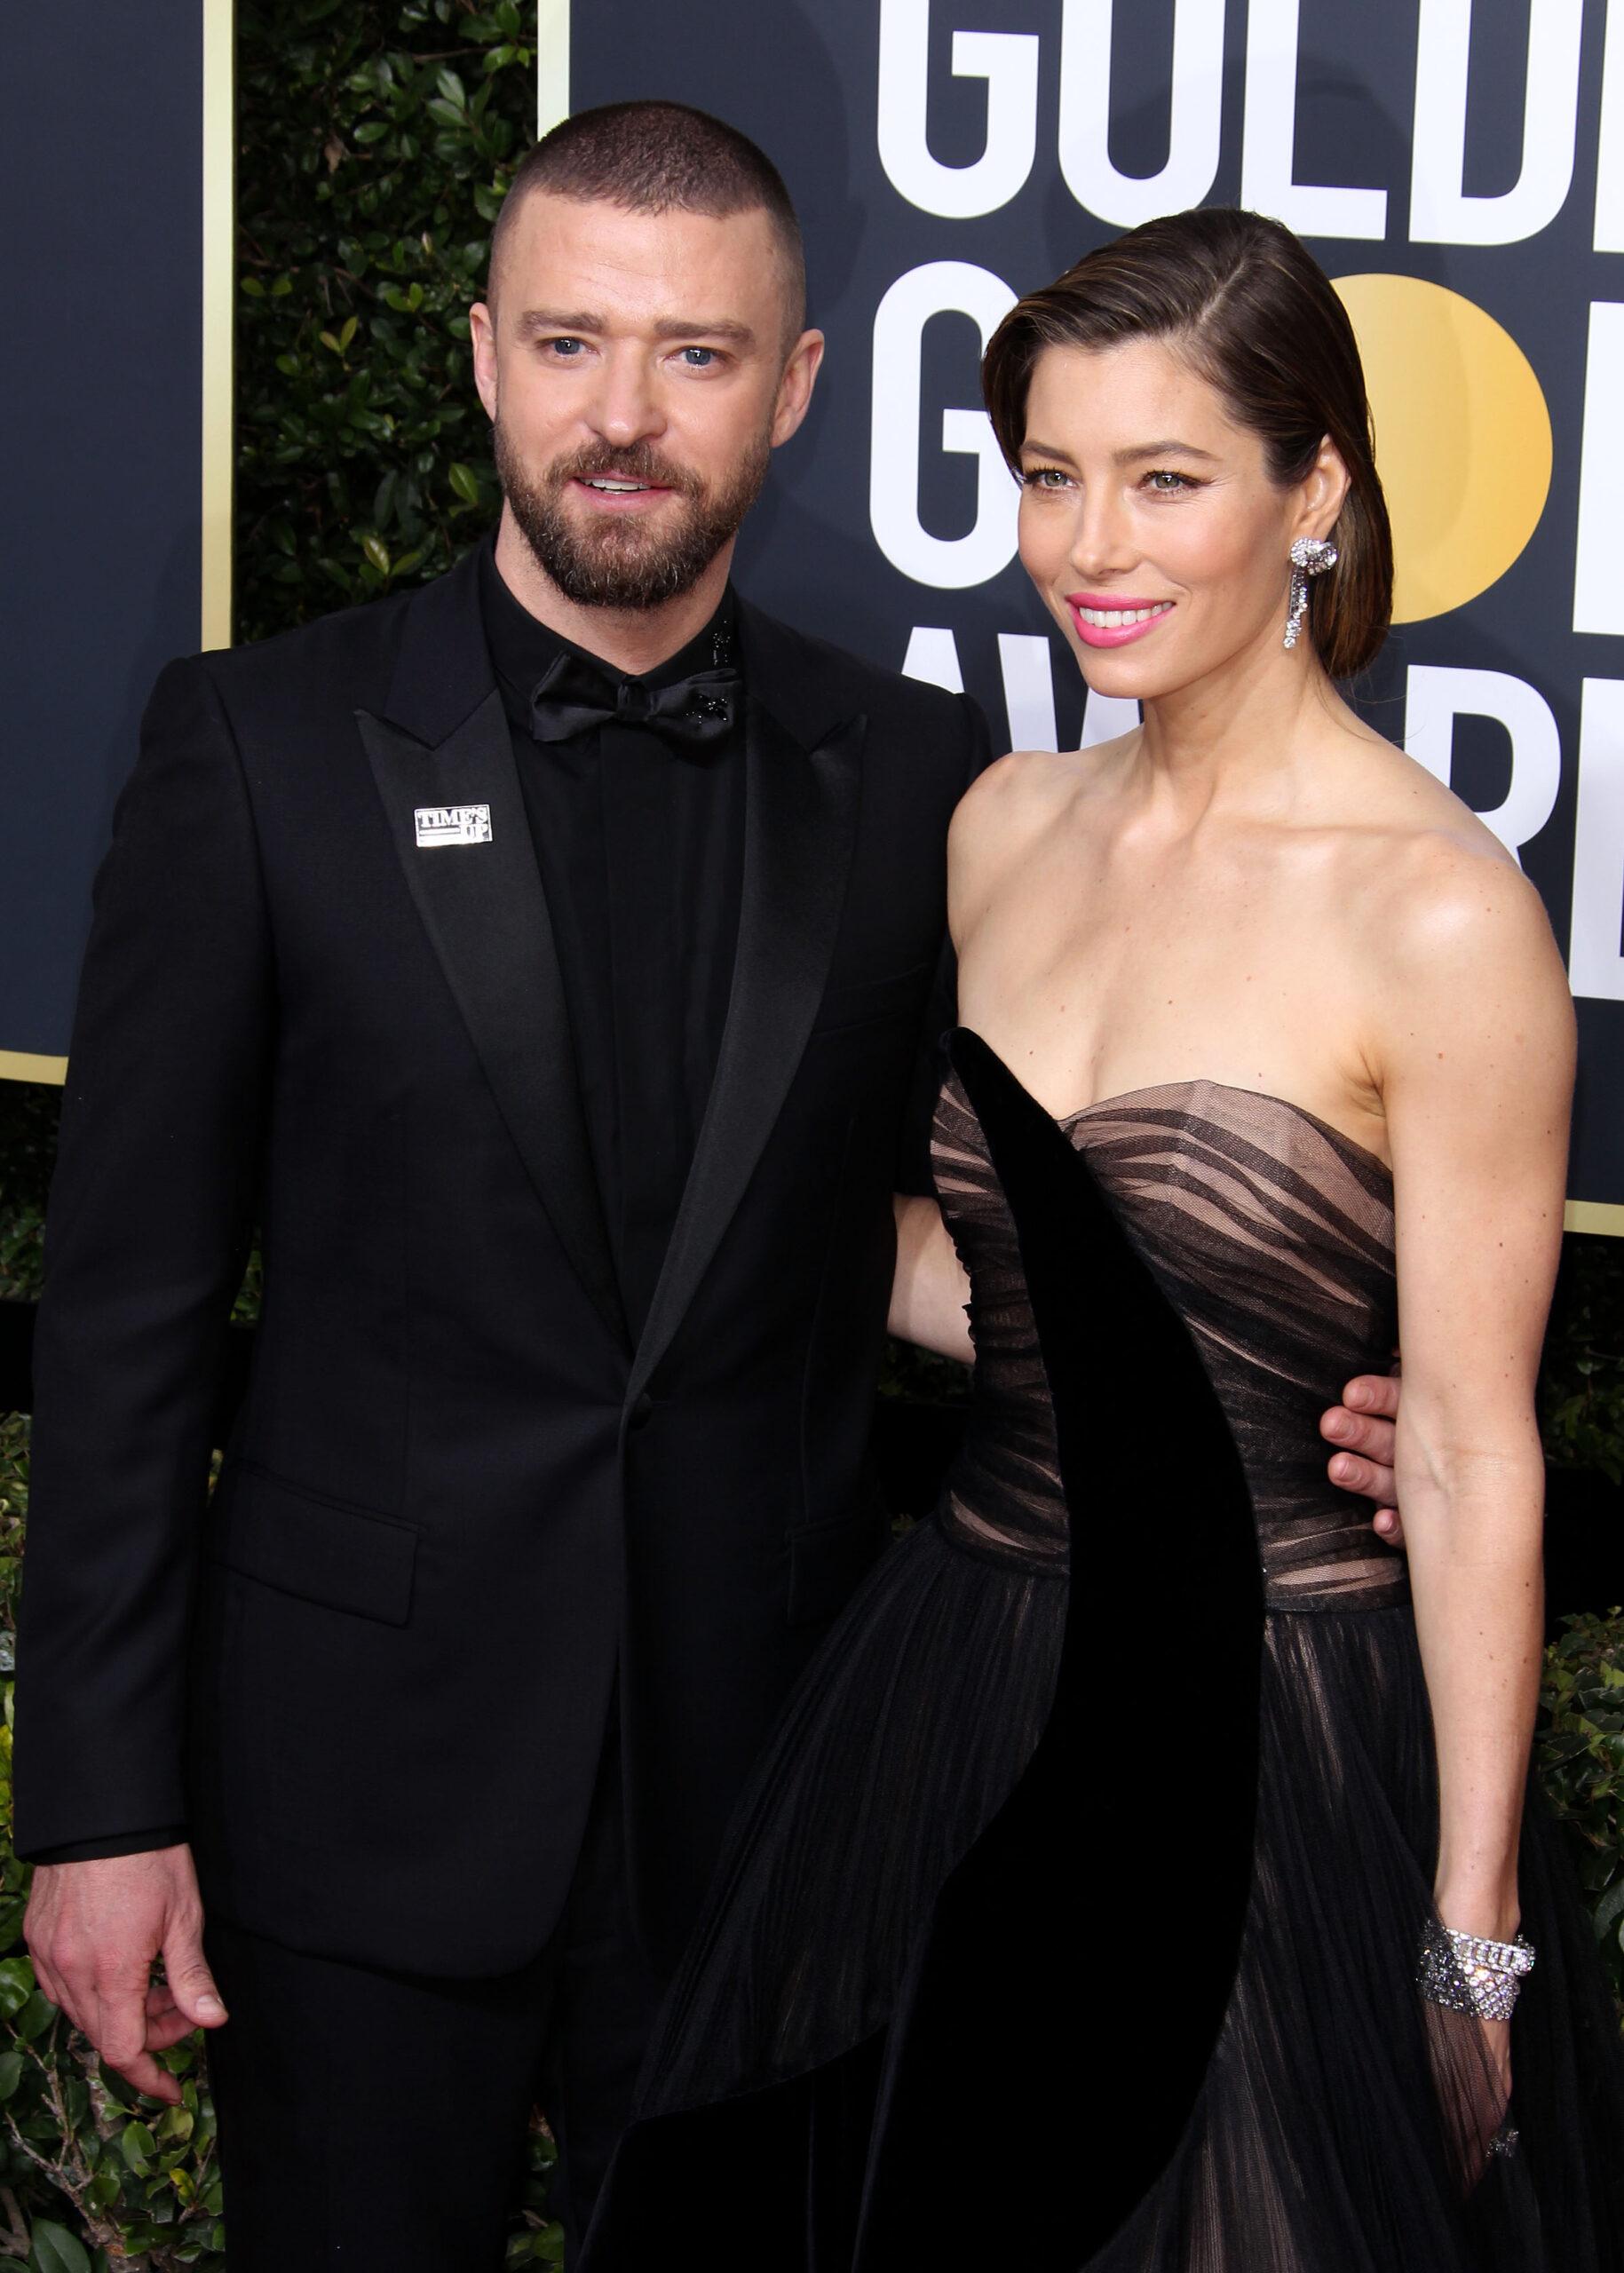 Jessica Biel and Justin Timberlake at the 75th Annual Golden Globes